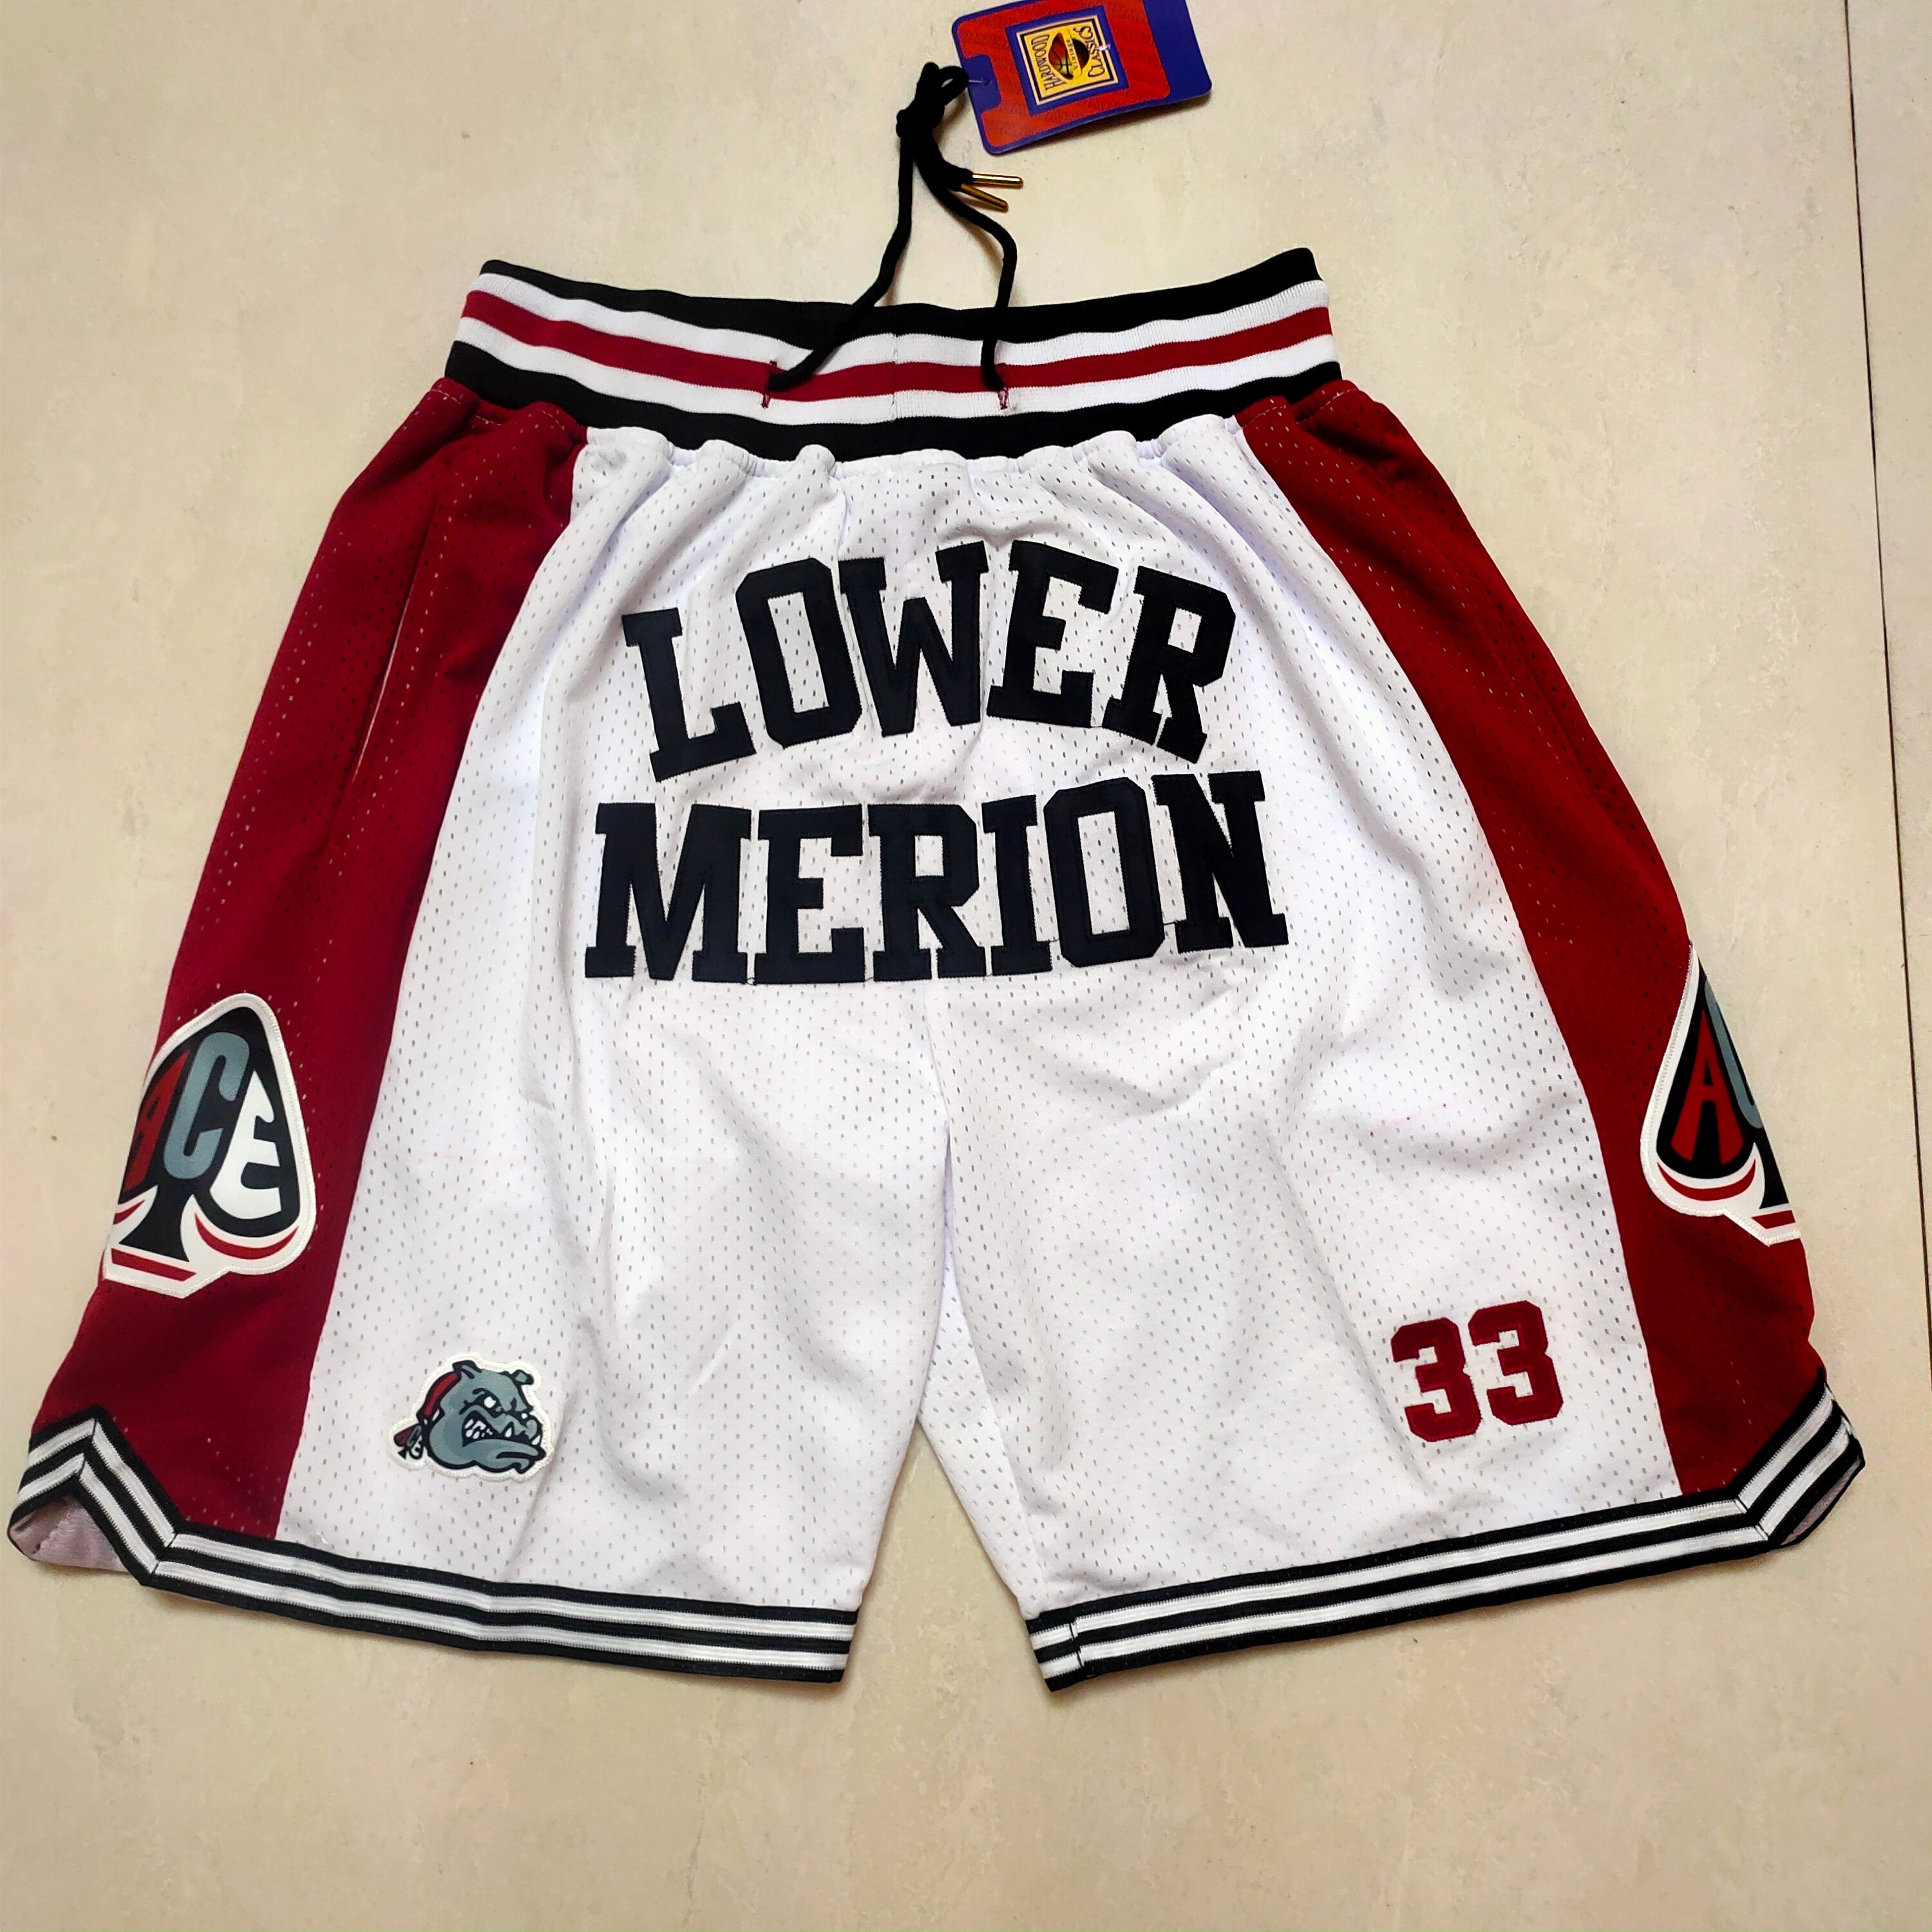 Lower merion white/red shorts